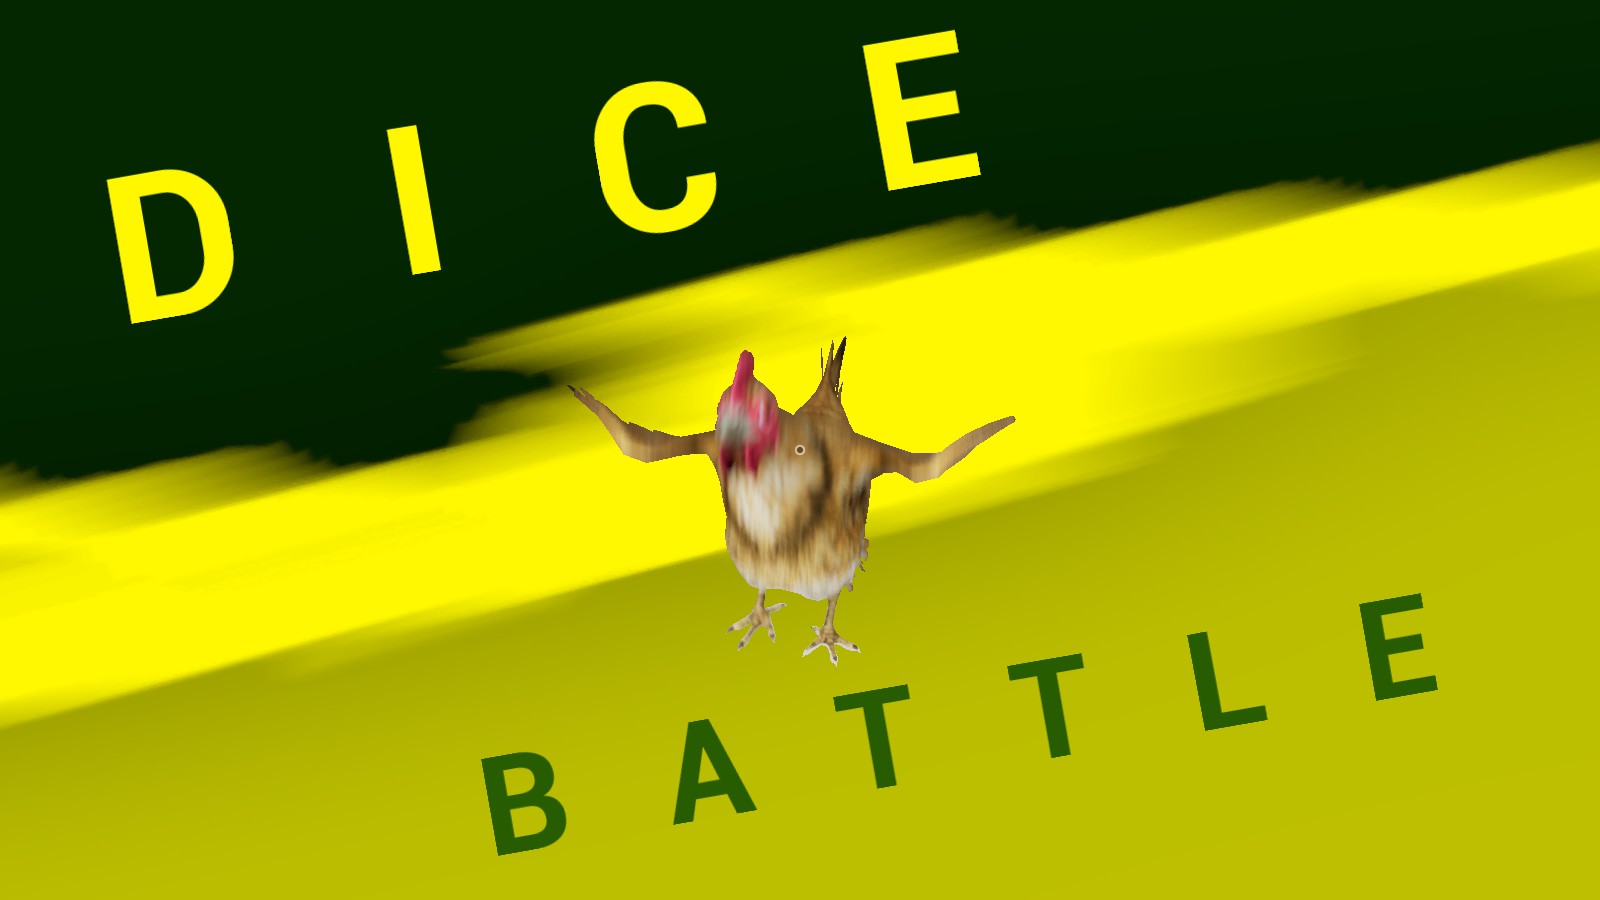 A focused look at the chicken who is challenging the player to a dice battle and is surrounded by a dark green with yellow text in the upper left area and a murkier green with dark text in the lower right.